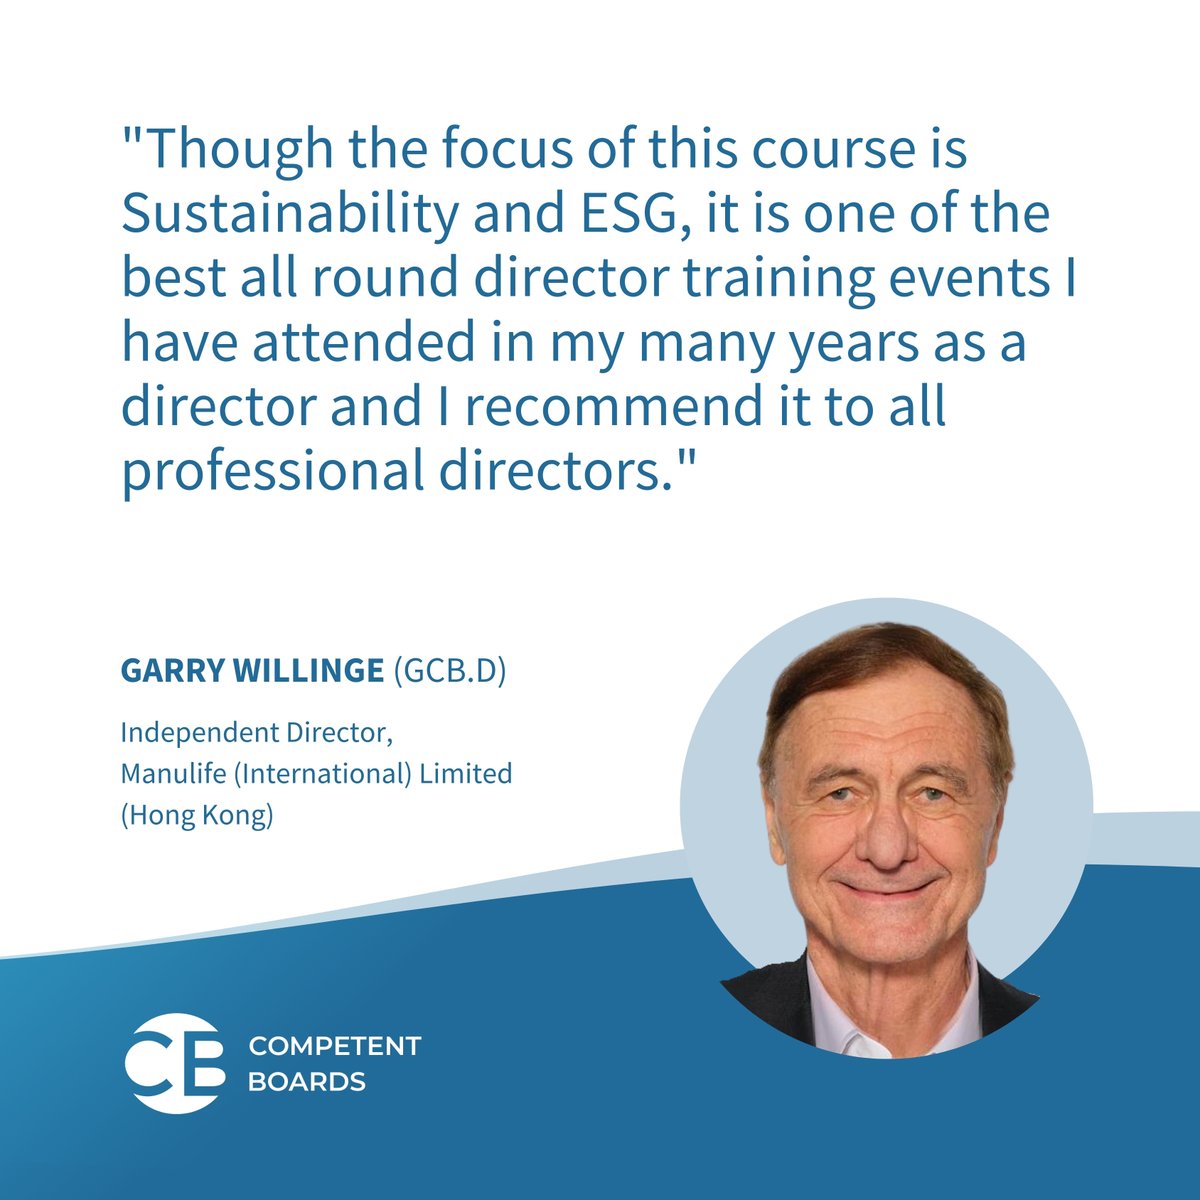 Thank you Competent Boards alumnus Garry Willinge for your kind words! Want the same experience? Learn more about our #Sustainability & #ESG Designation and Certification competentboards.com/programs/susta… #ExecutiveEducation #BoardEducation